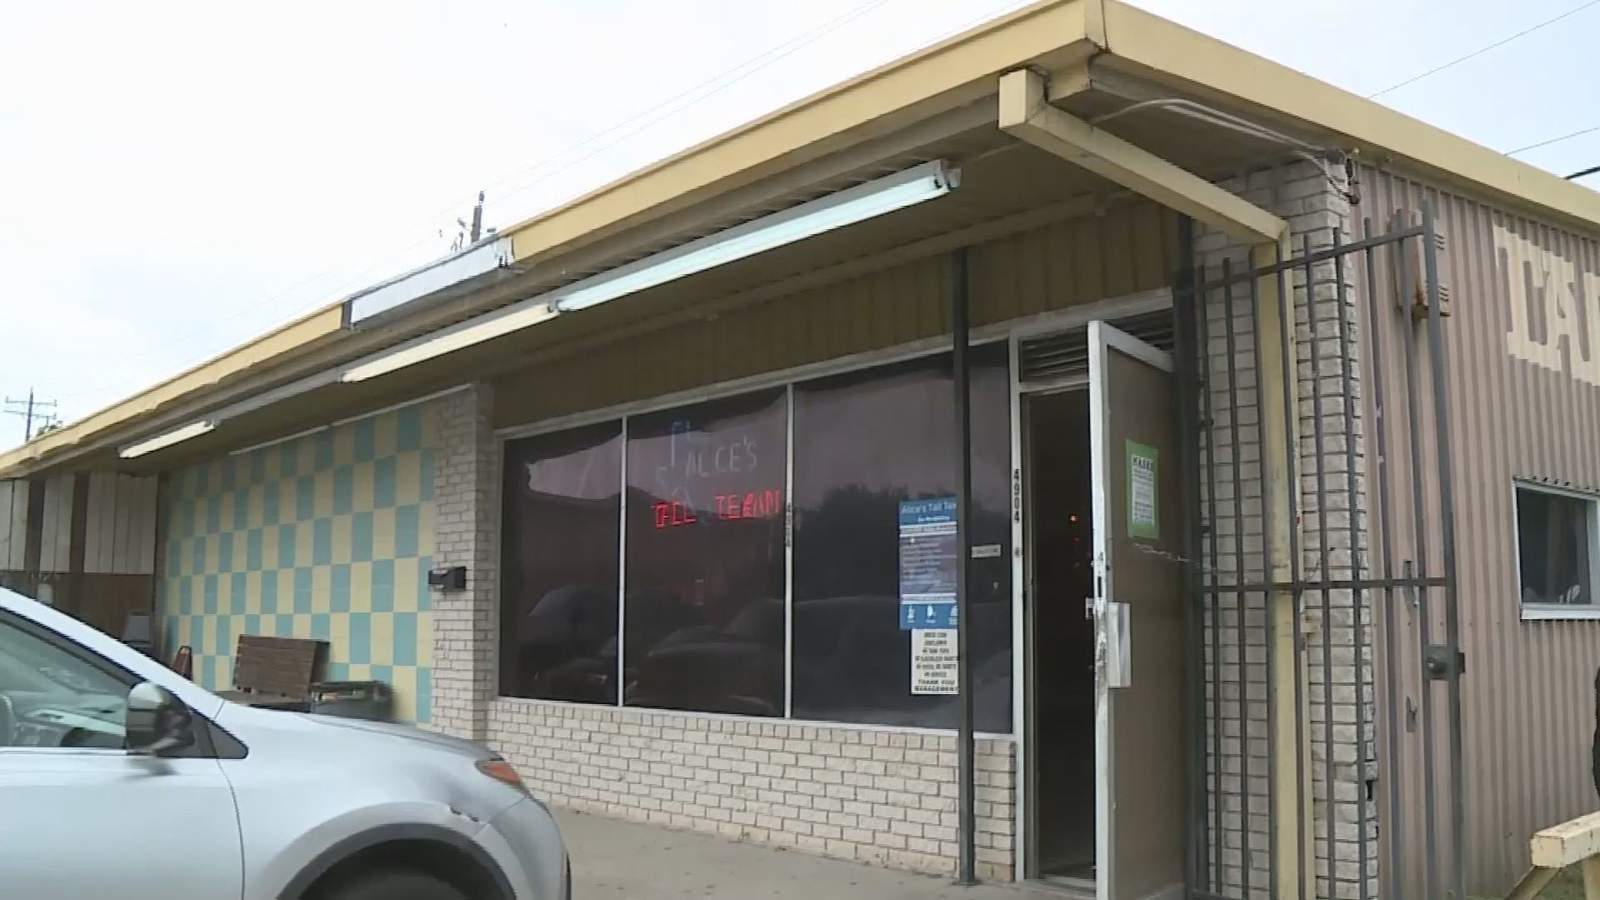 Alice’s Tall Texan Drive Inn closes after 40 years in the Heights